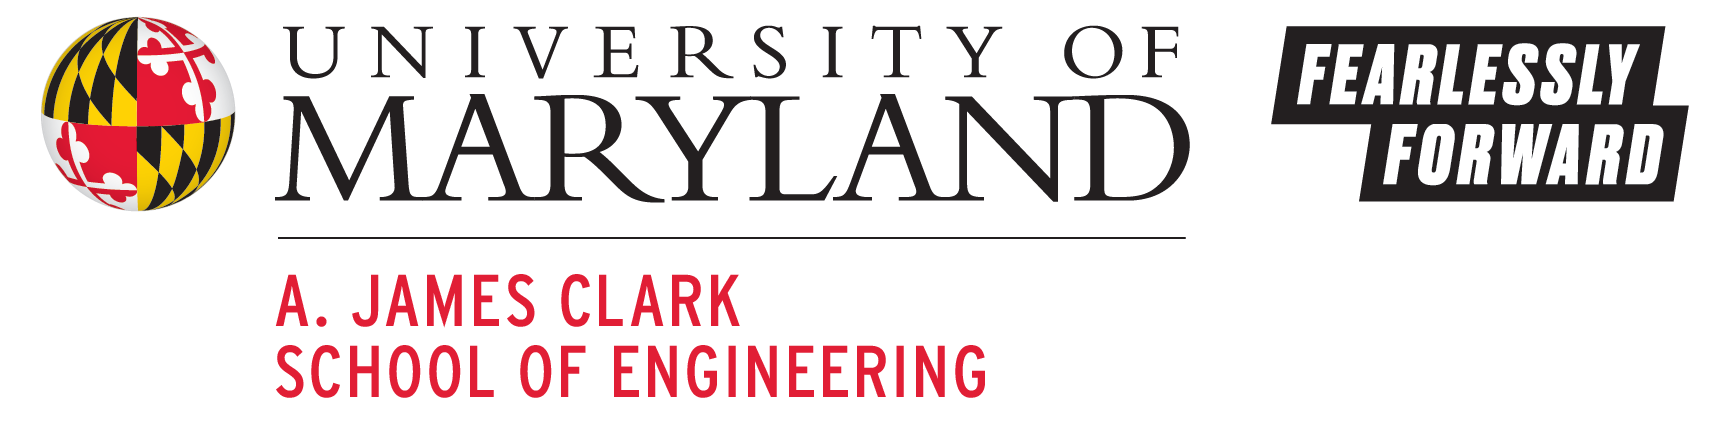 University of Maryland A. James Clark School of Engineering Fearlessly Forward Campaign Logo